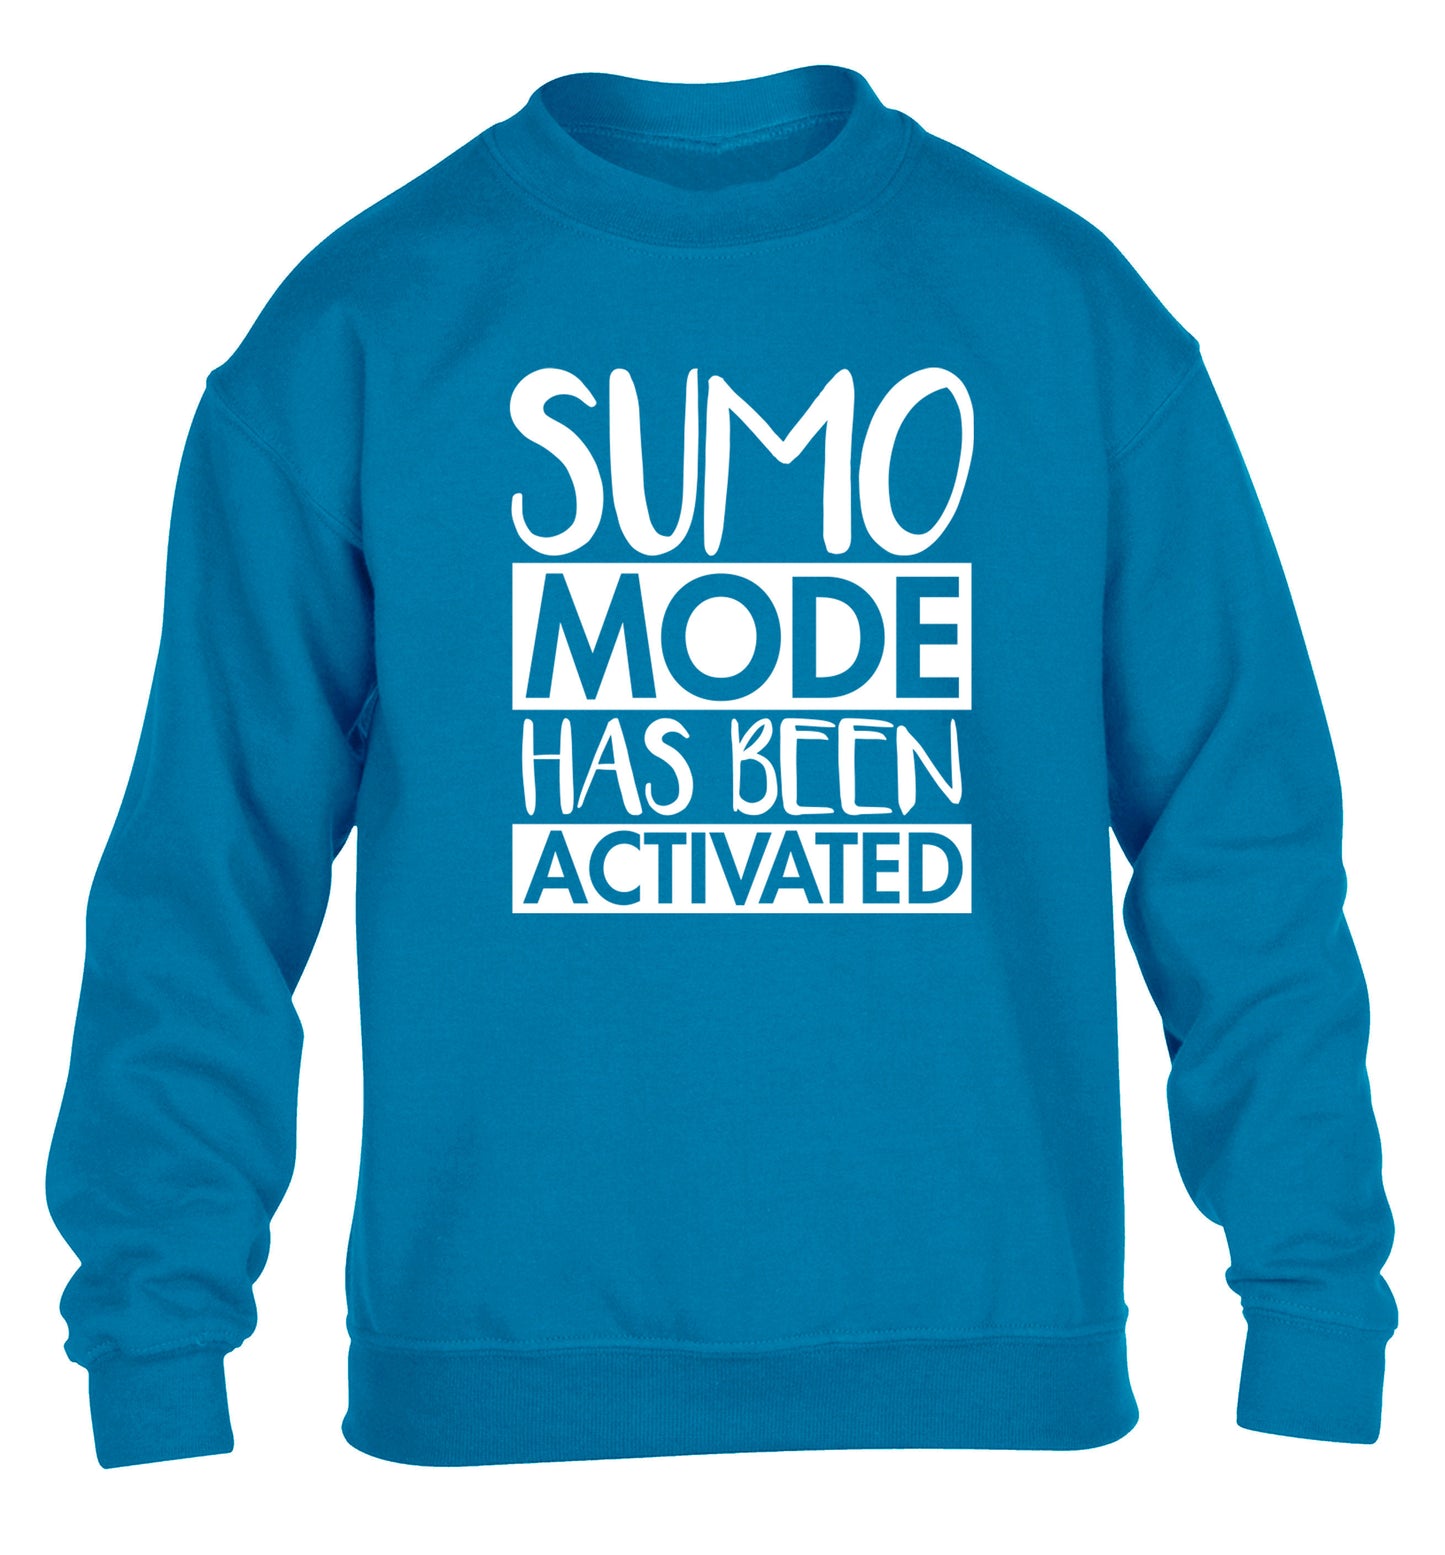 Sumo mode activated children's blue sweater 12-14 Years